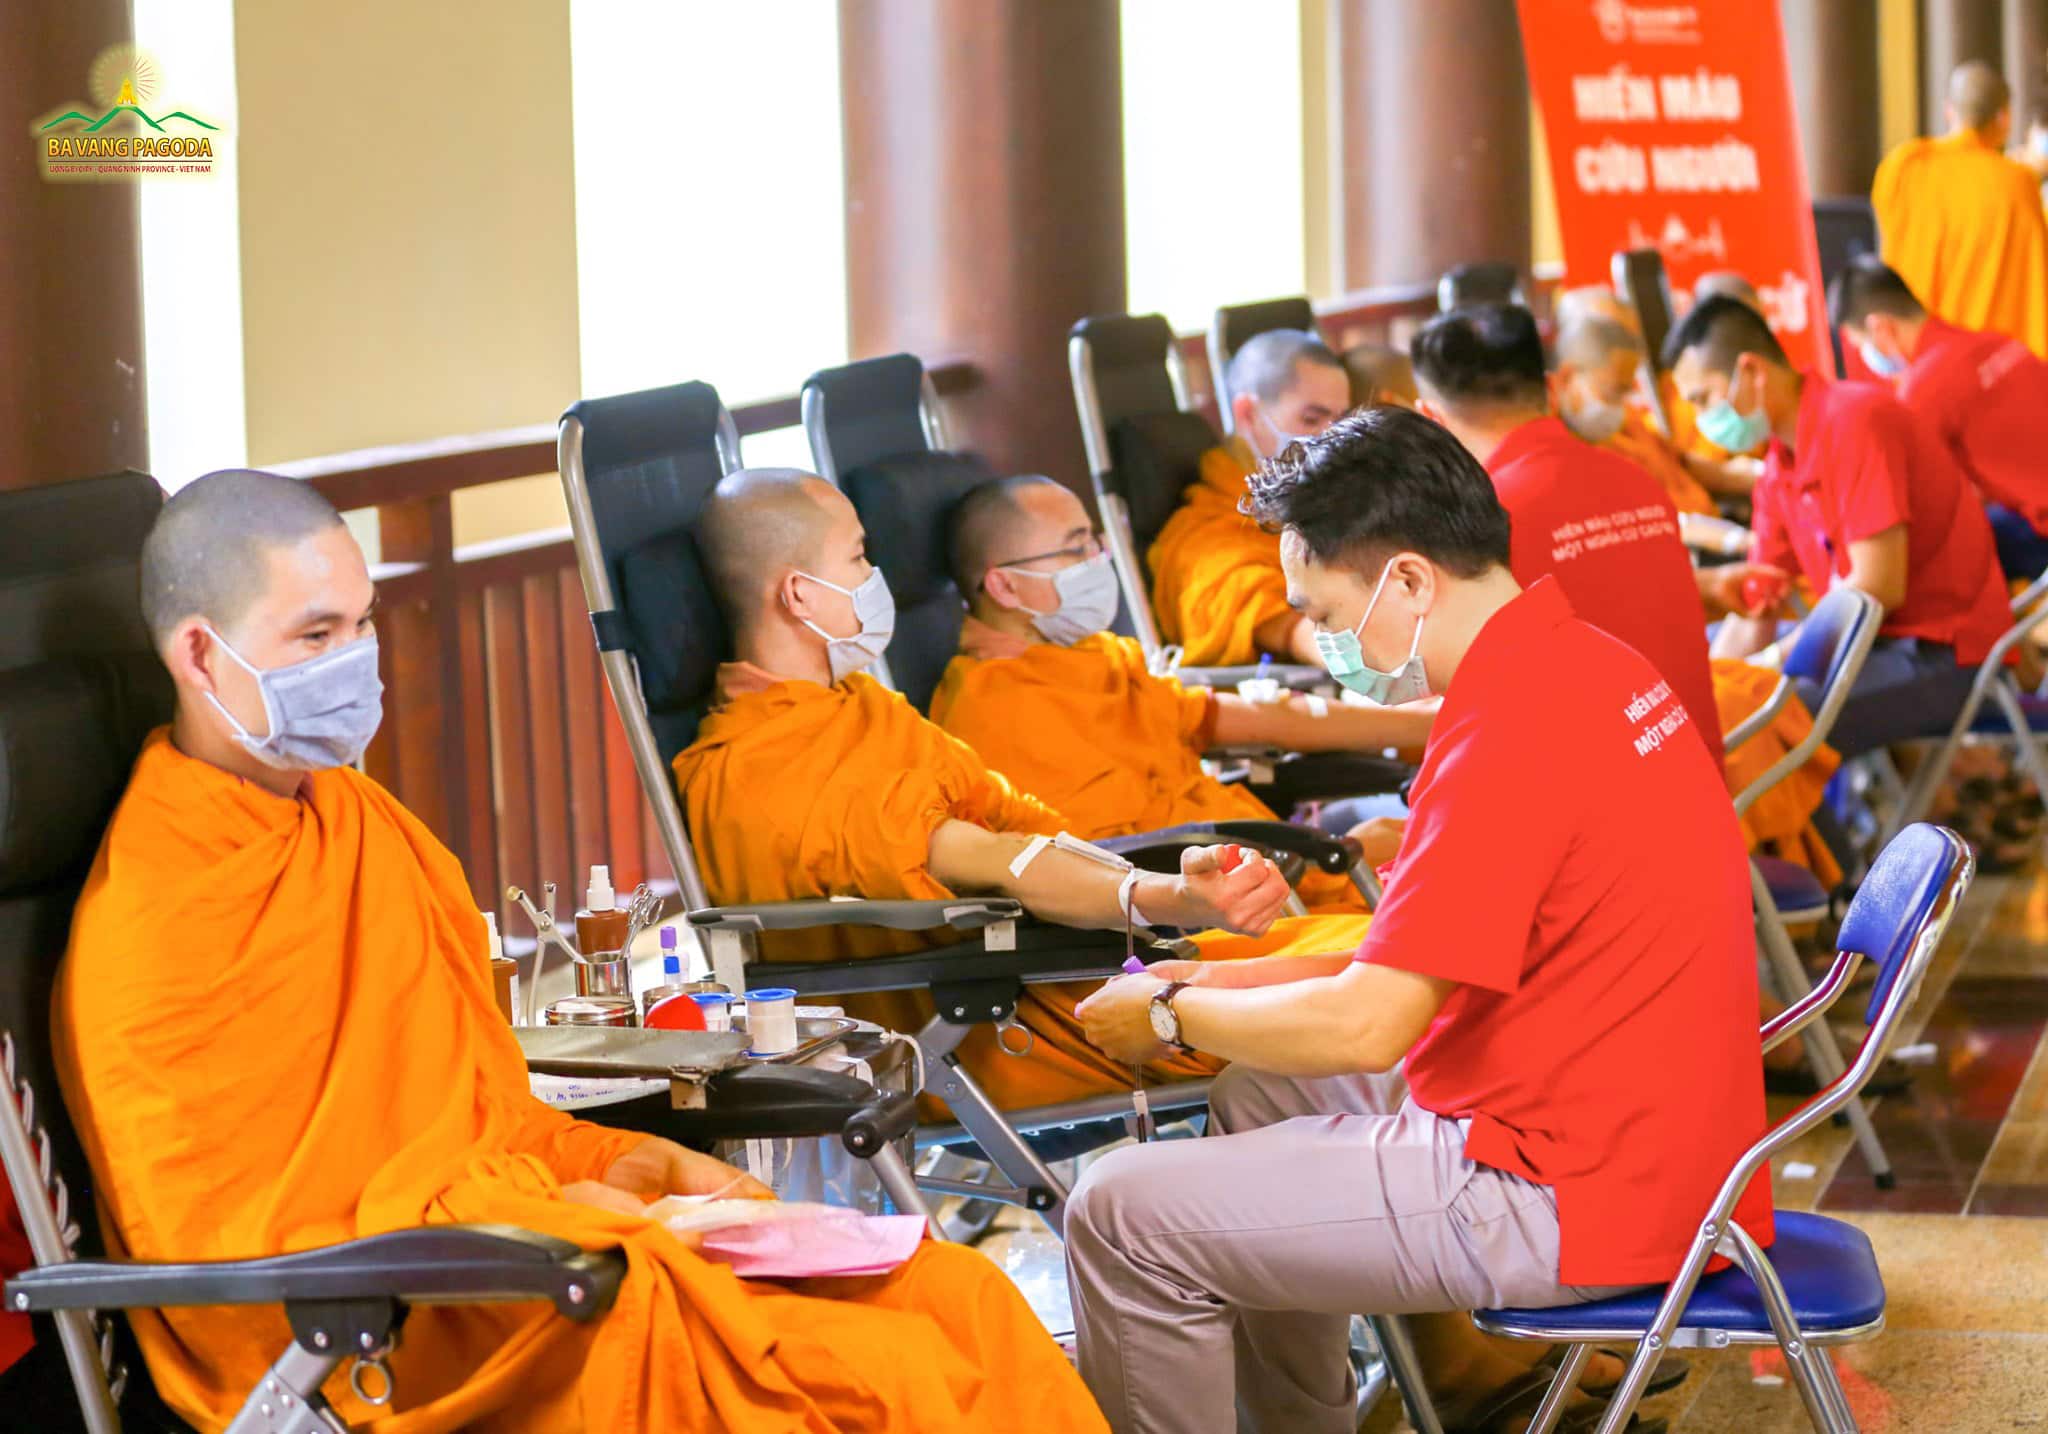 The images of Monks participating in the blood donation activities.